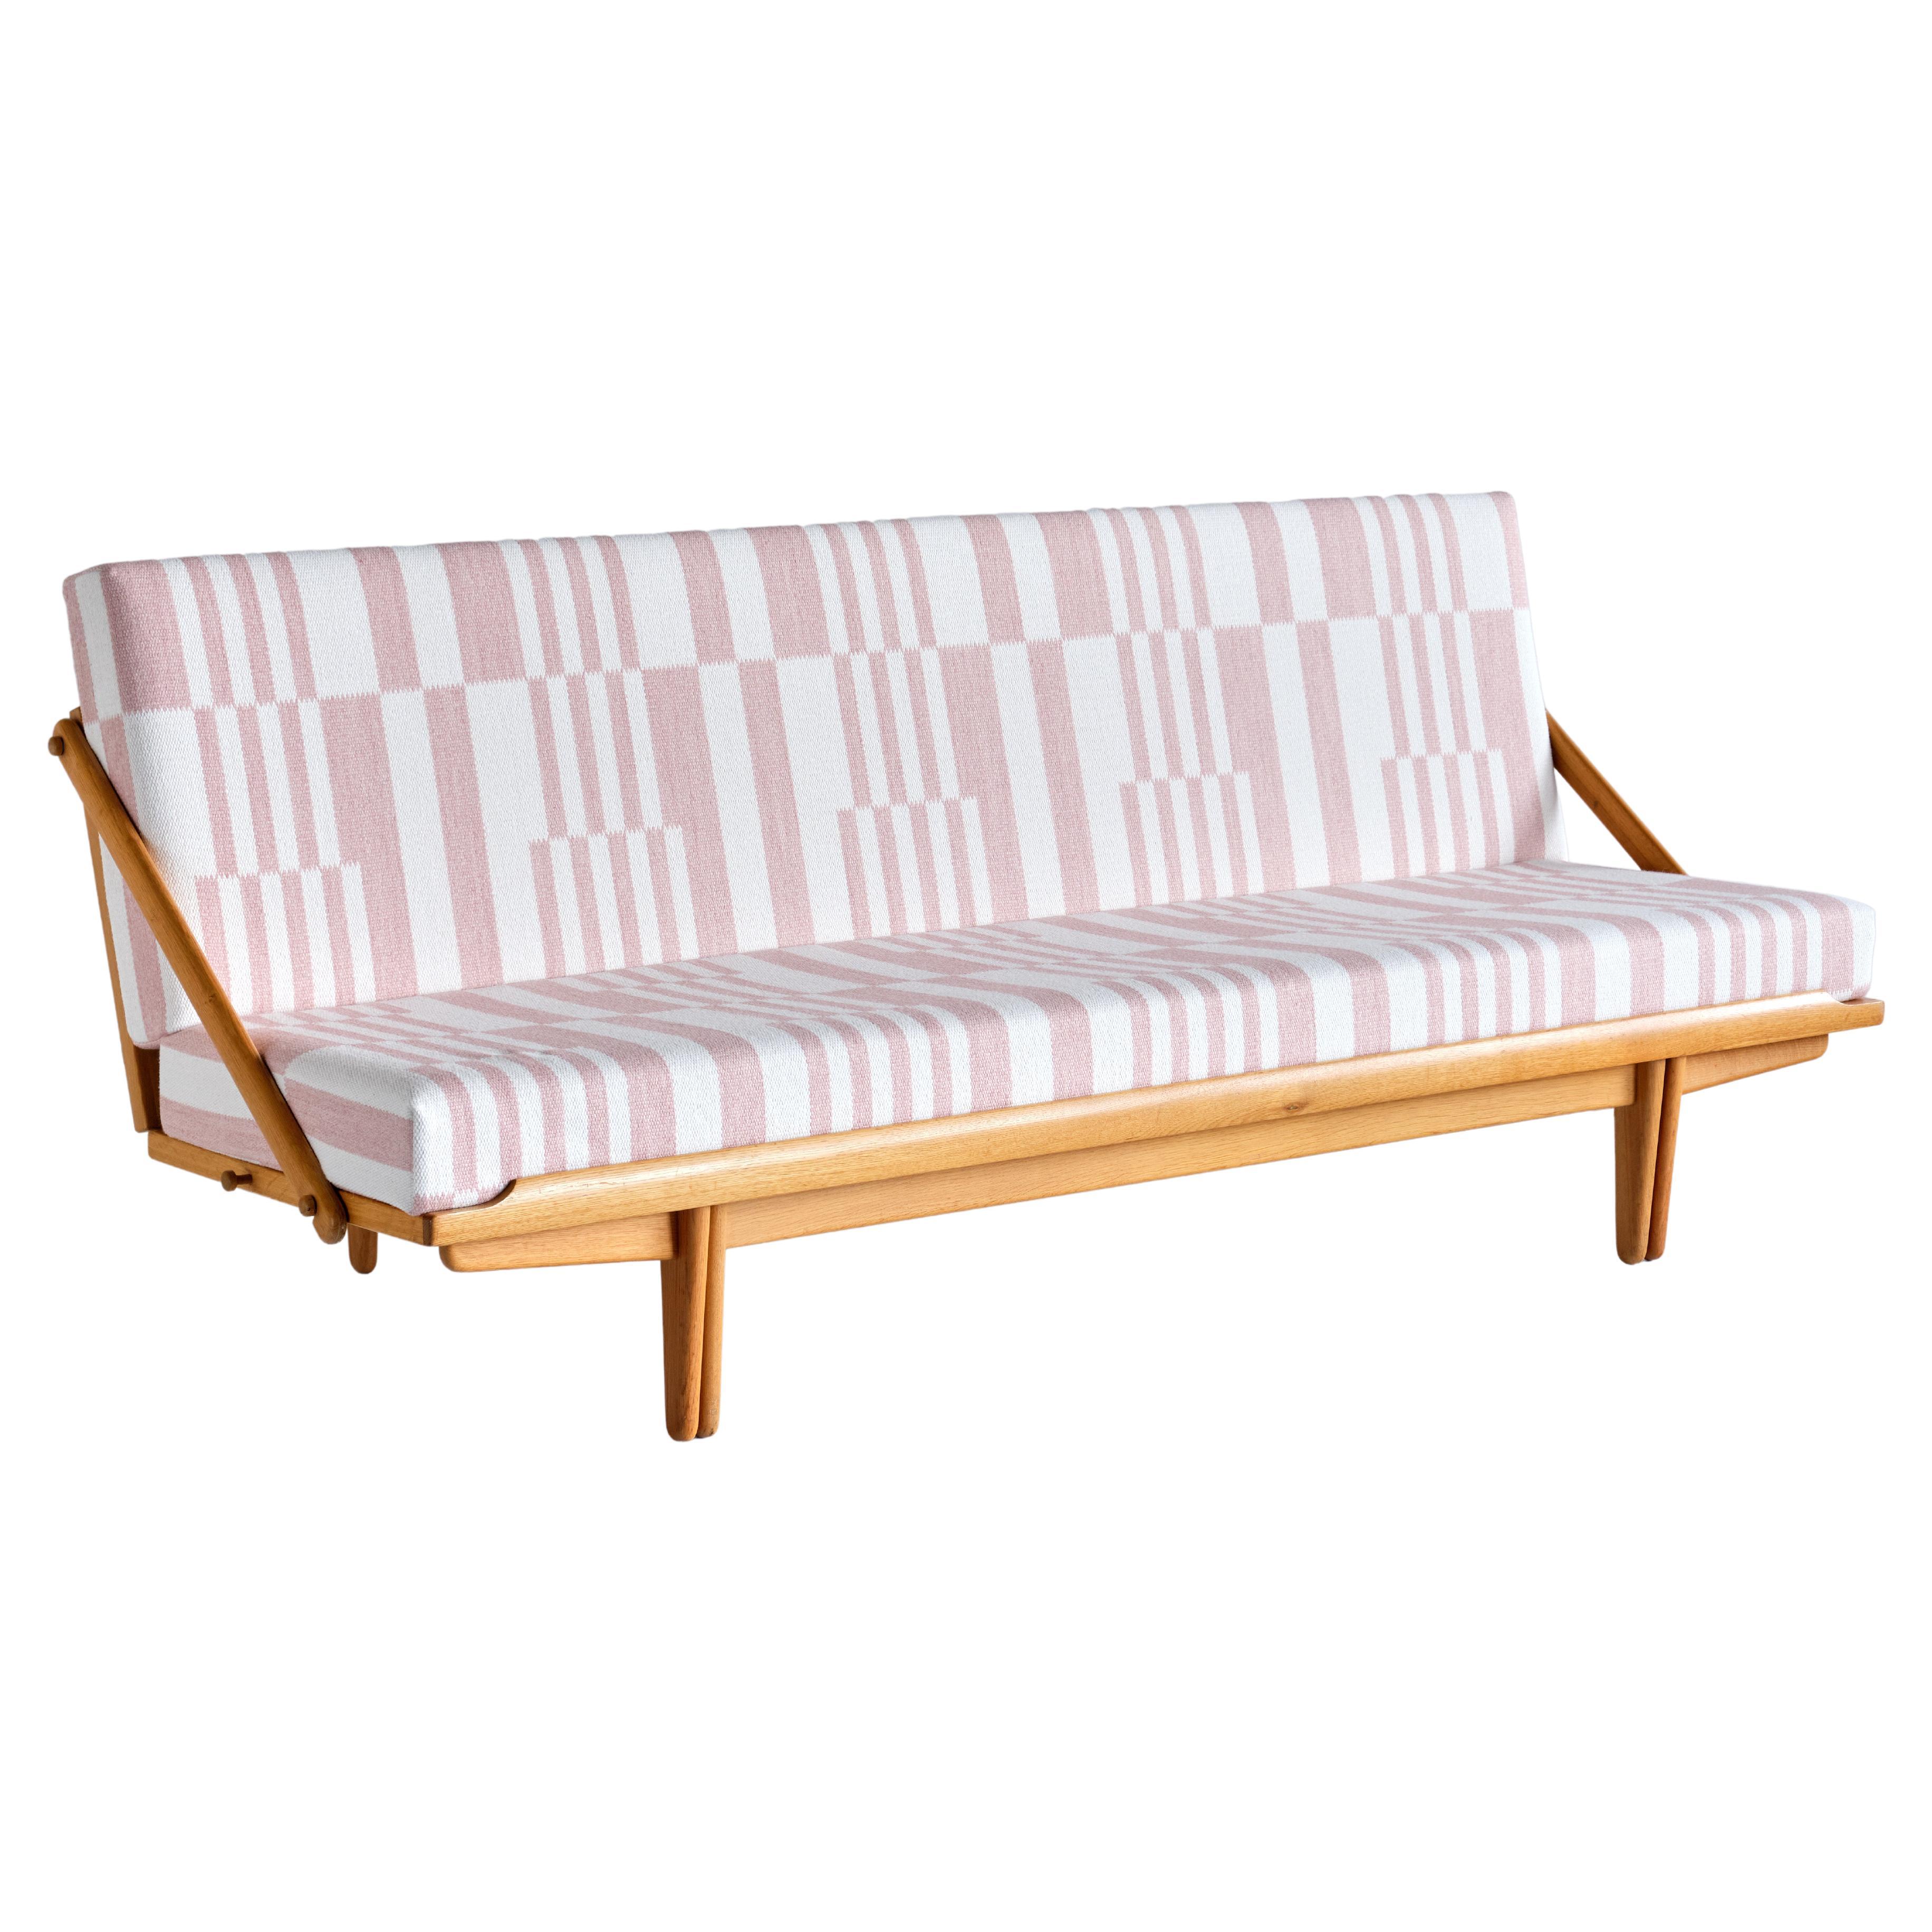 Poul Volther Sofa / Daybed in Oak and Pierre Frey Fabric, Gemla, Sweden, 1955